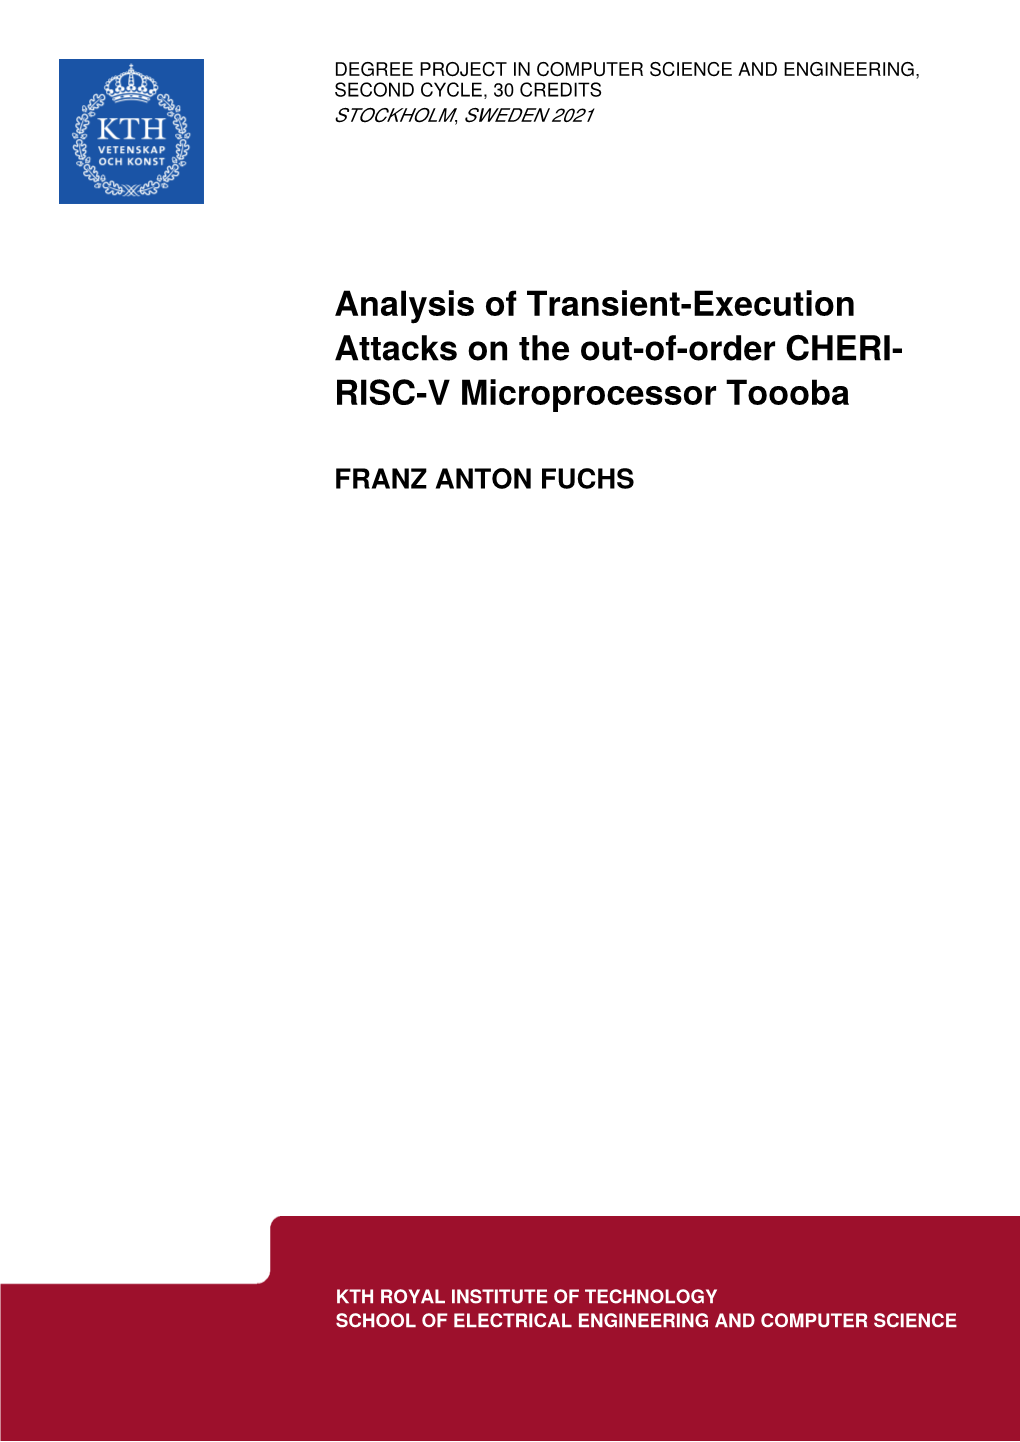 Analysis of Transient-Execution Attacks on the Out-Of-Order CHERI- RISC-V Microprocessor Toooba